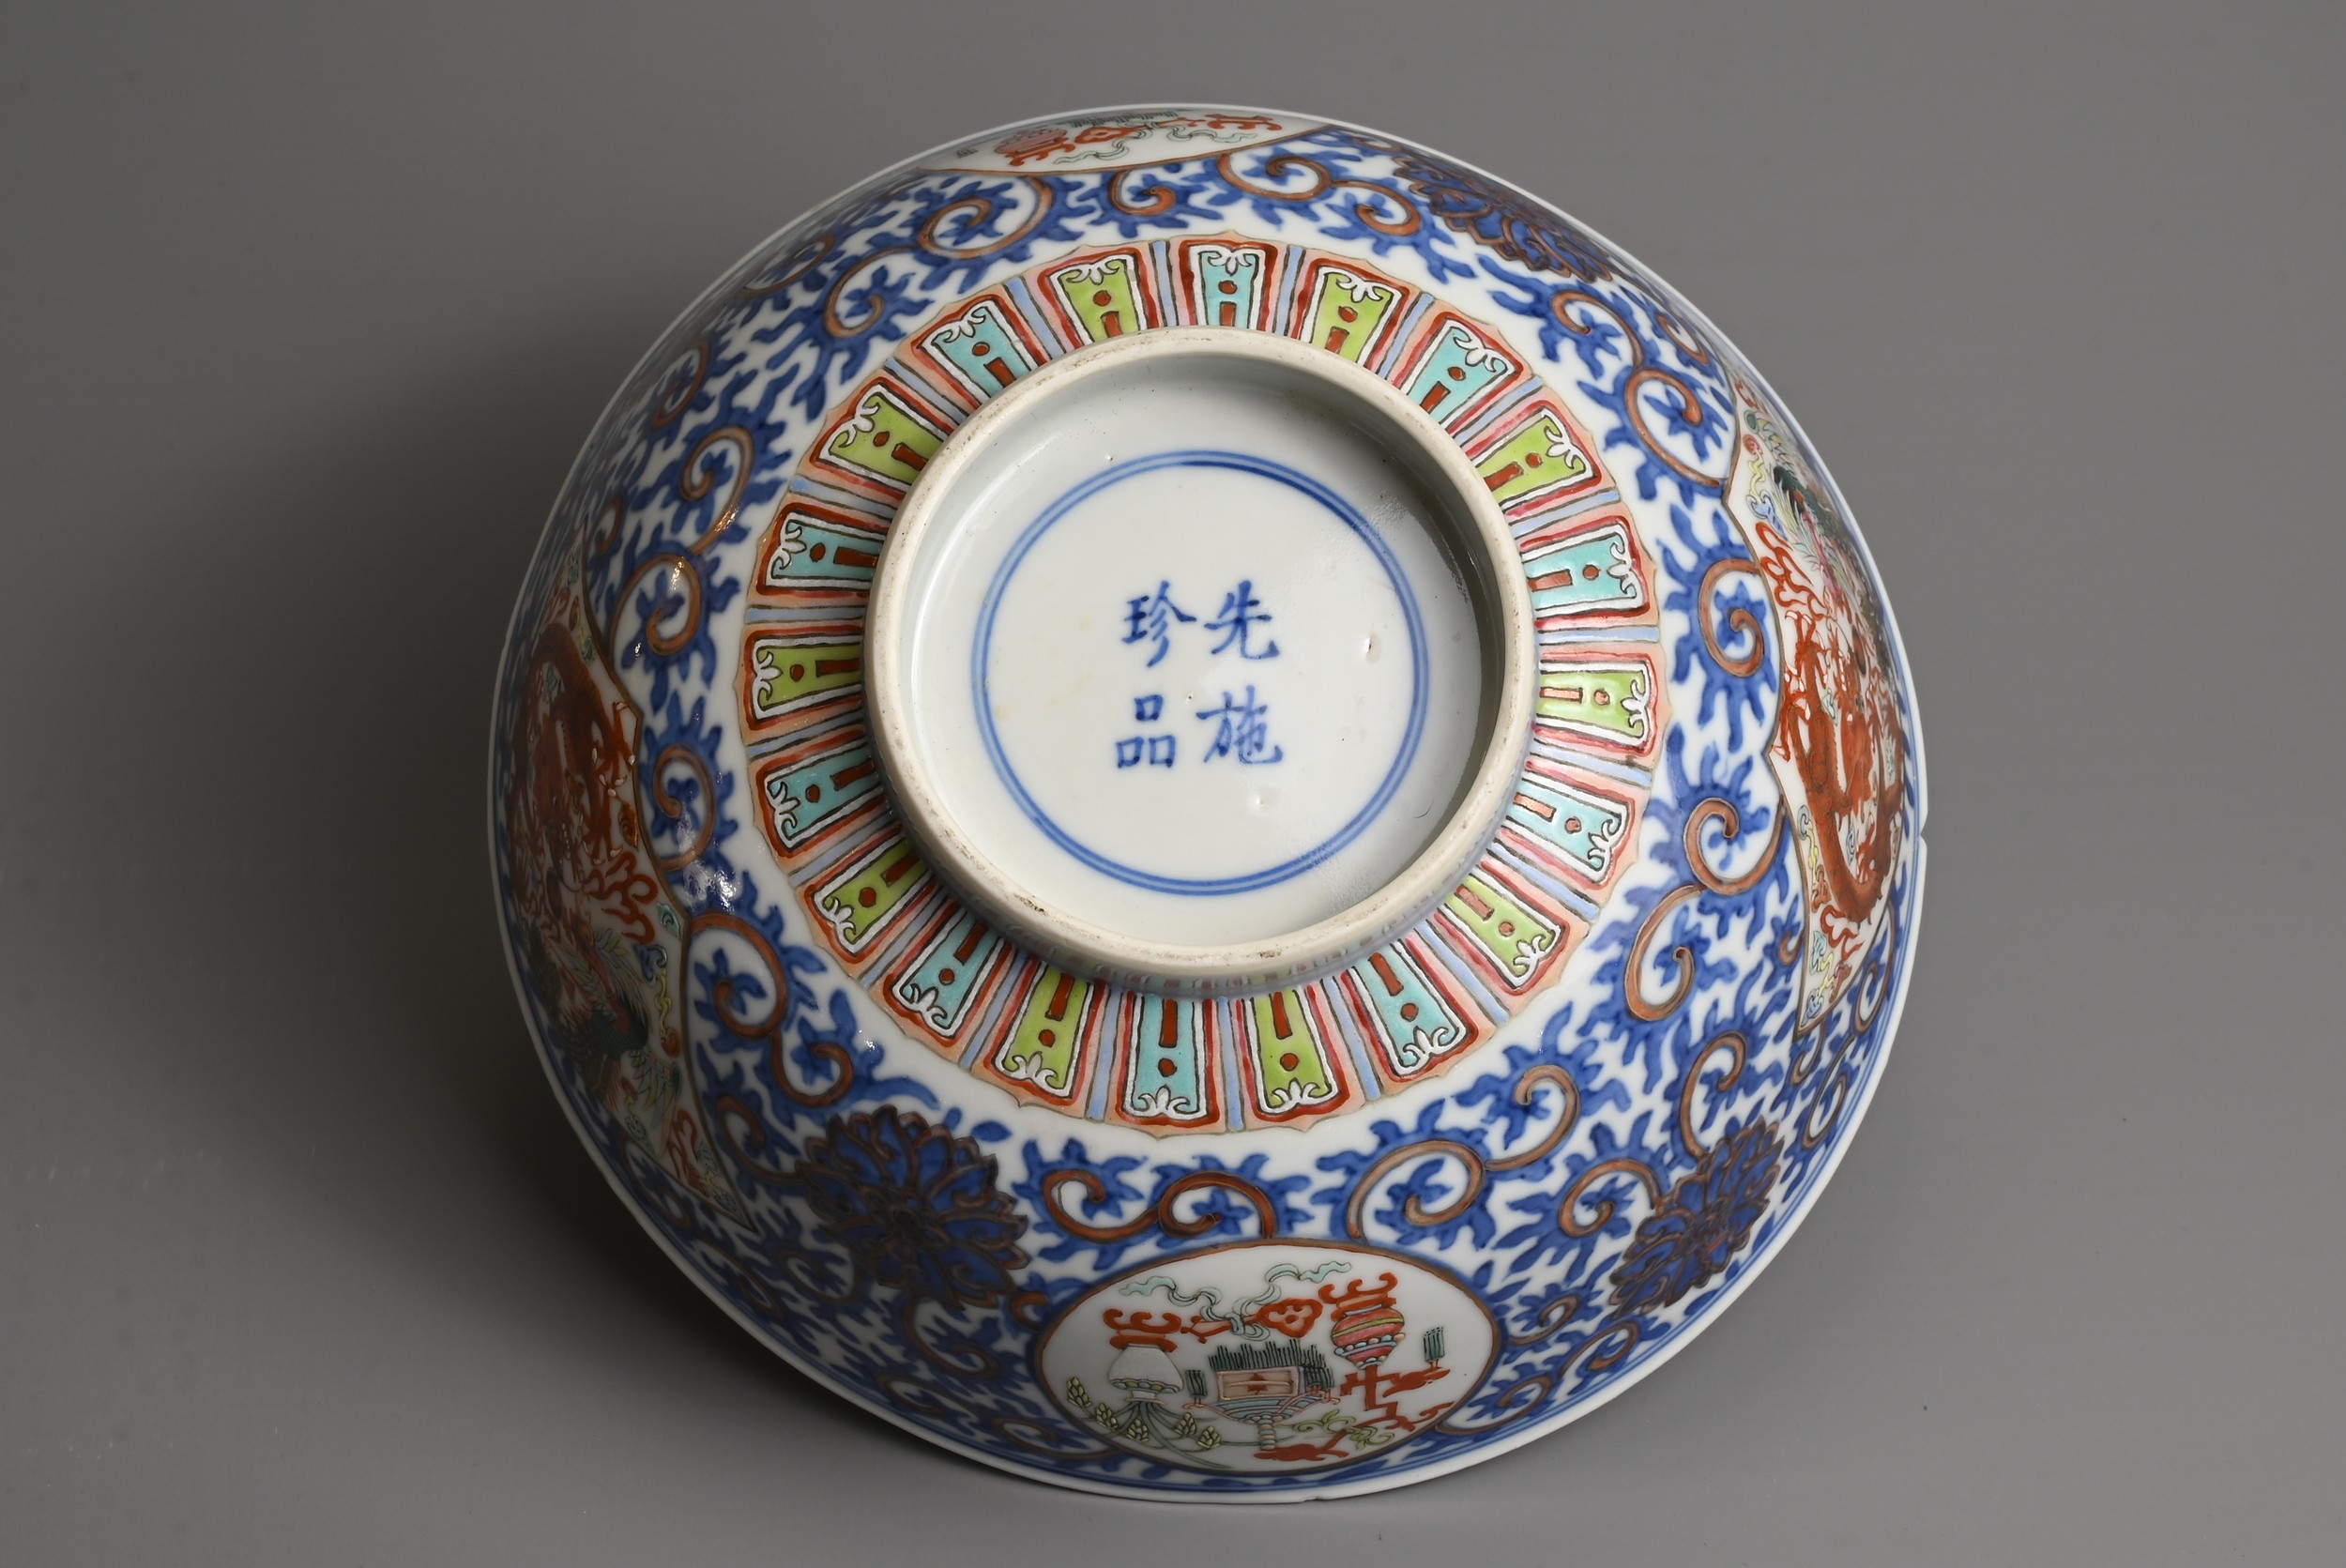 A CHINESE BLUE AND WHITE AND ENAMEL DECORATED PORCELAIN BOWL, LATE QING DYNASTY. Decorated with - Image 7 of 8